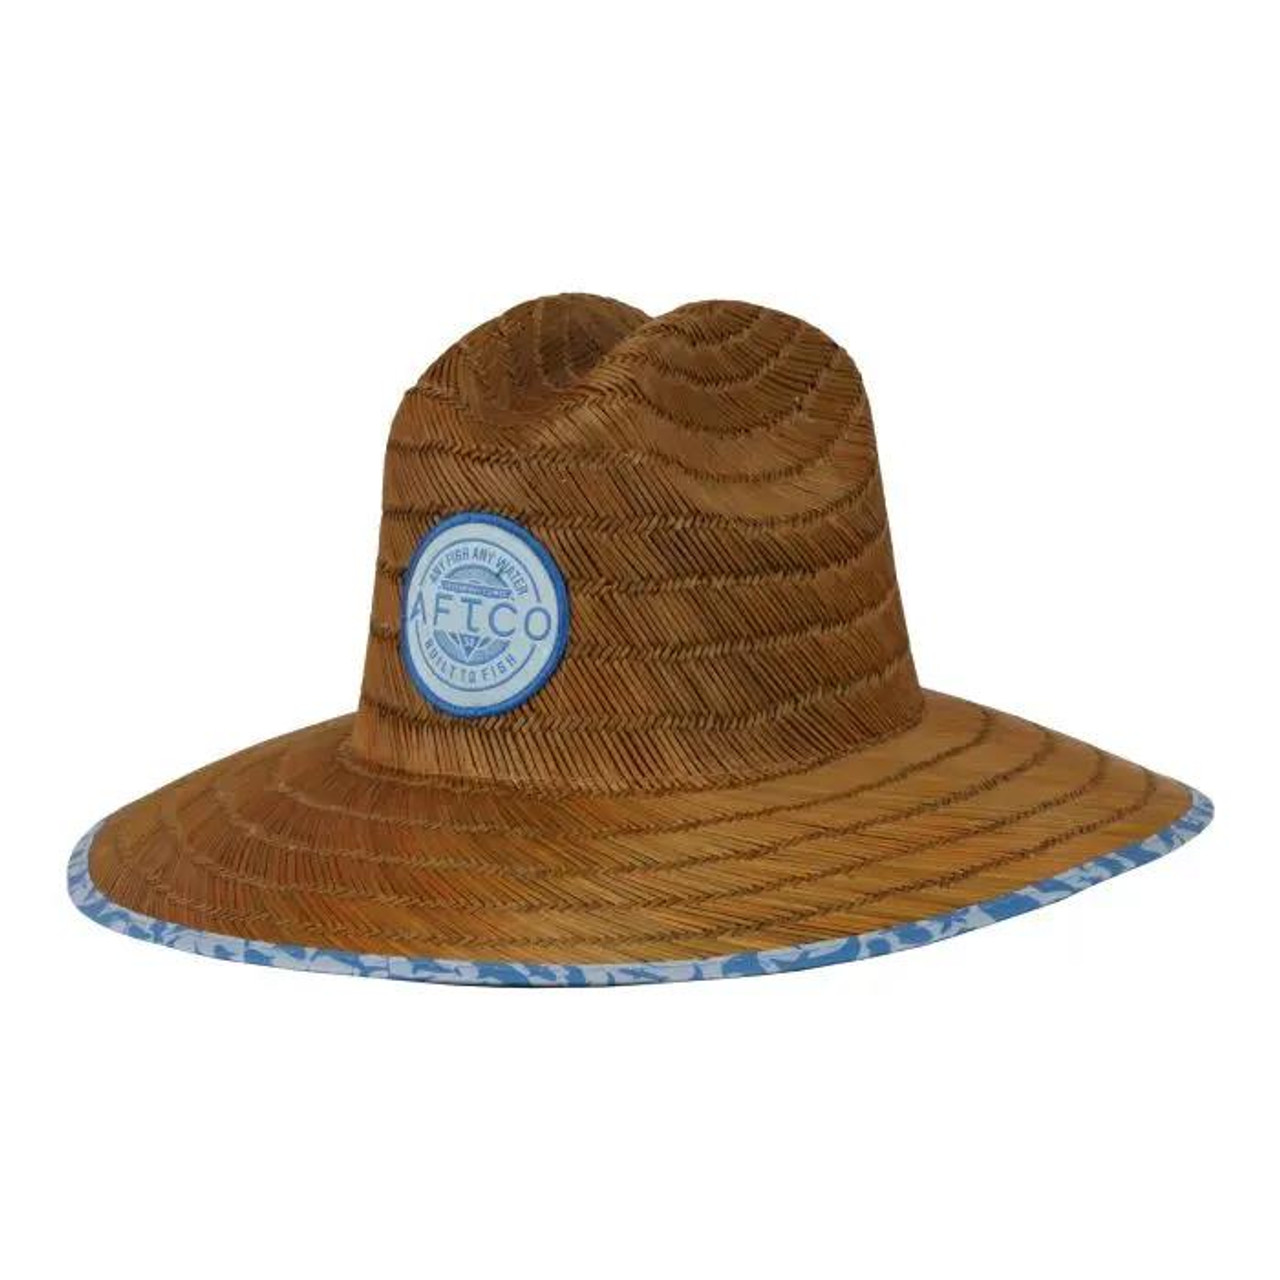 AFTCO Youth Illuminated Straw Hat - Slate Blue - Dance's Sporting